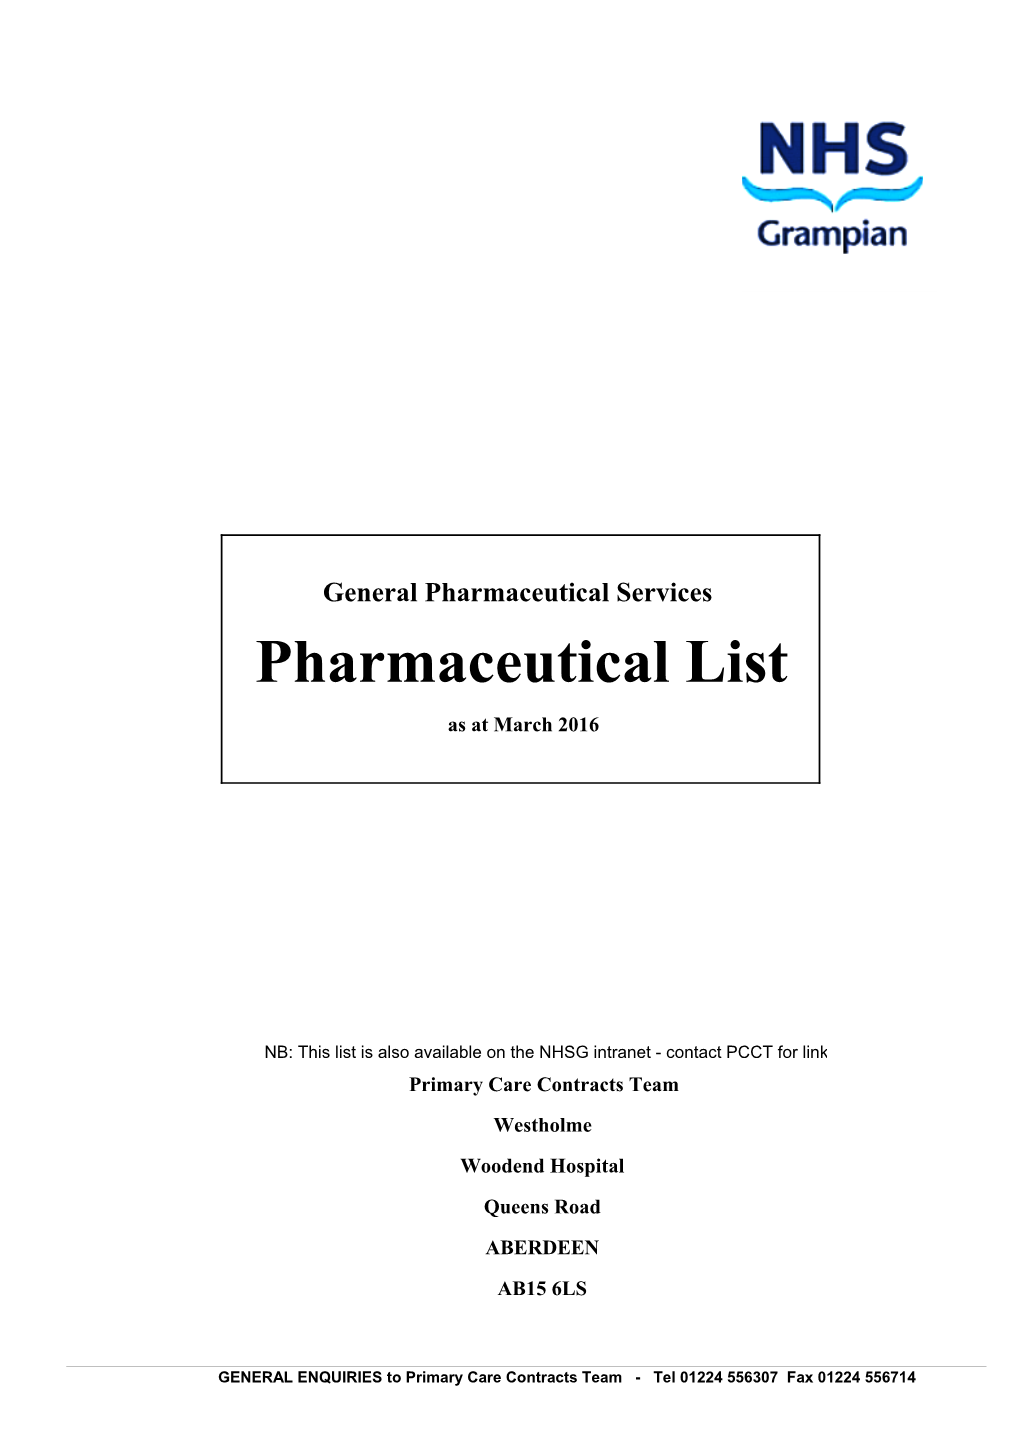 Pharmaceutical List As at March 2016